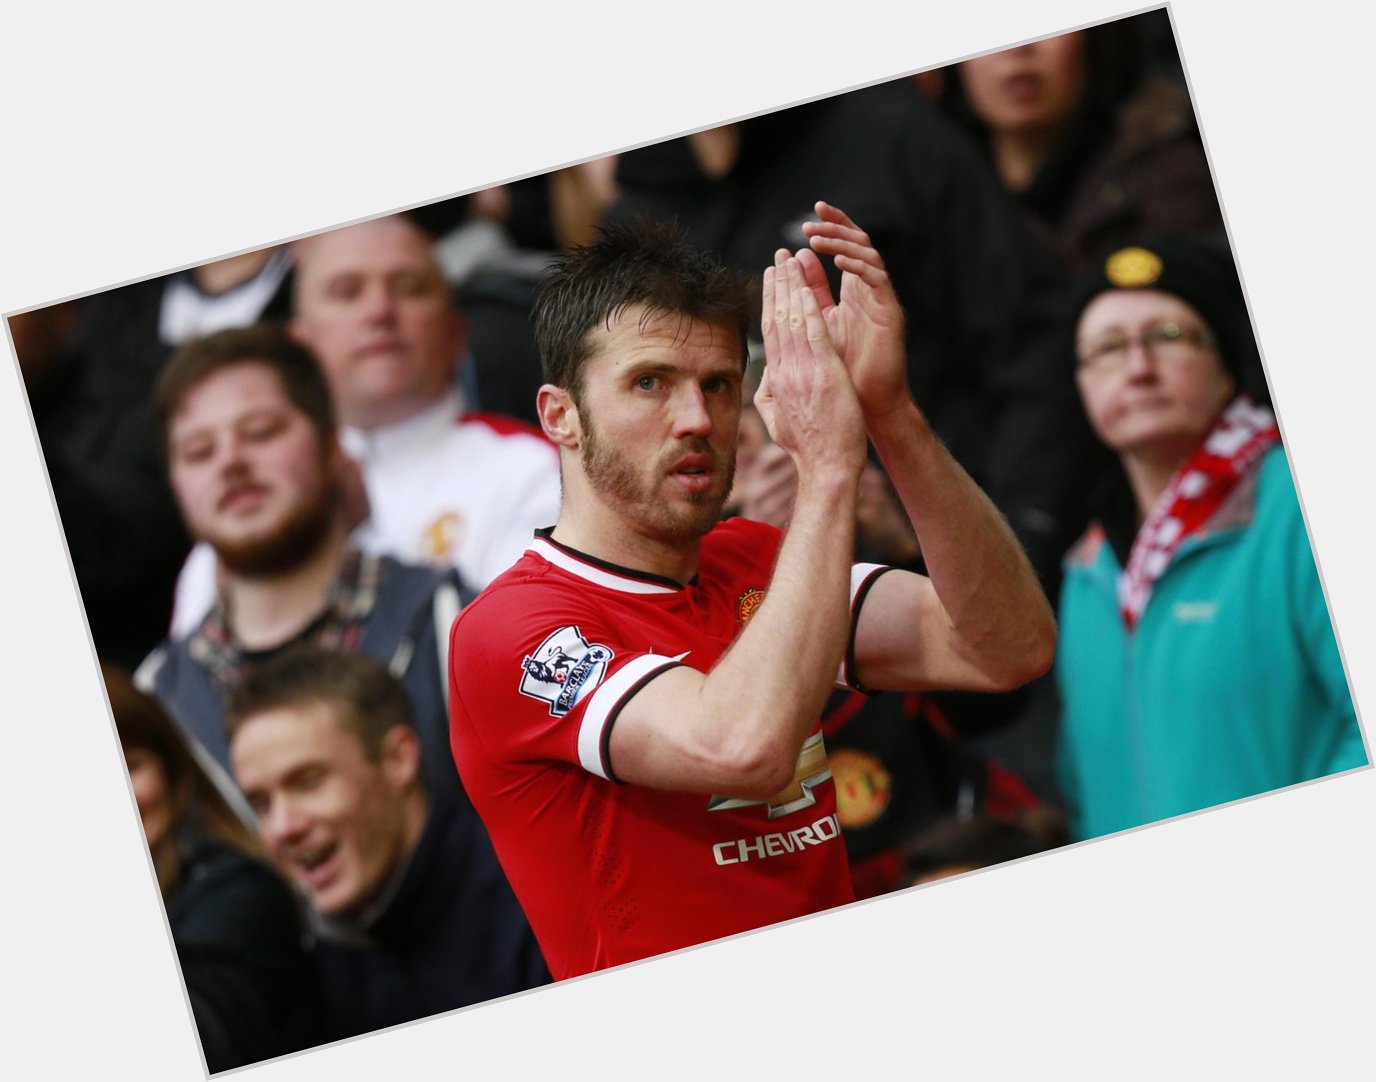 Happy 34th birthday to Michael Carrick. 

He\s won 5 Premier League titles in 9 seasons at Man Utd. 

Absolutely key. 